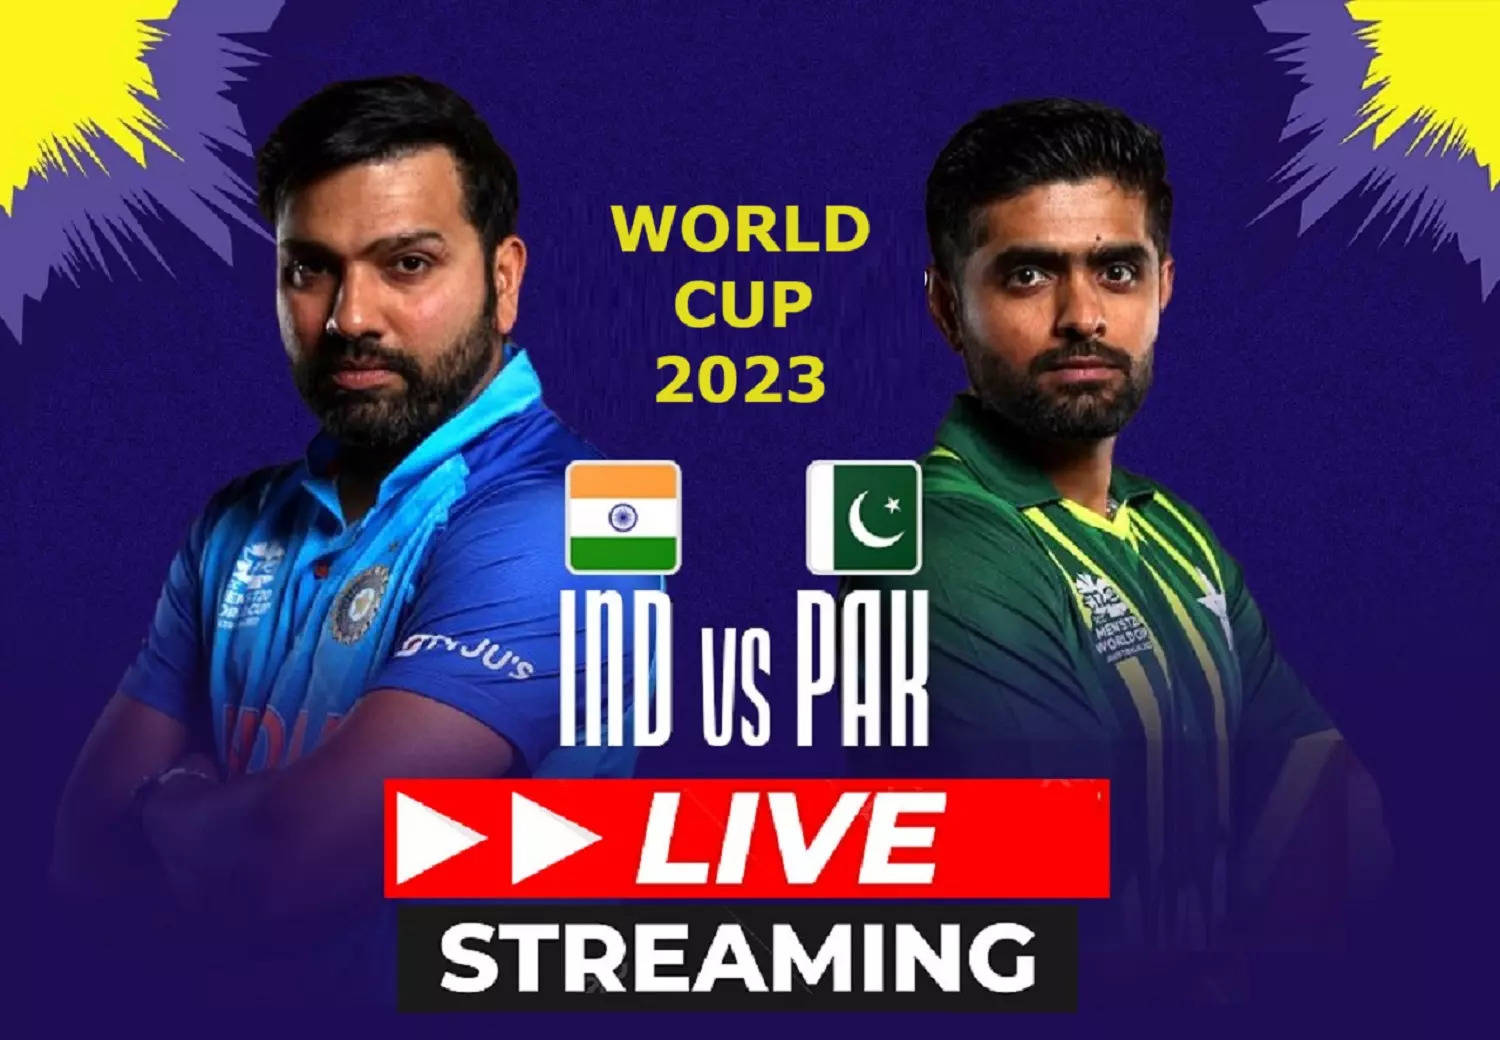 Ind Vs Pak Live Tv Streaming Online Free Watch Icc Odi Cricket World Cup 2023 On Star Sports 0824